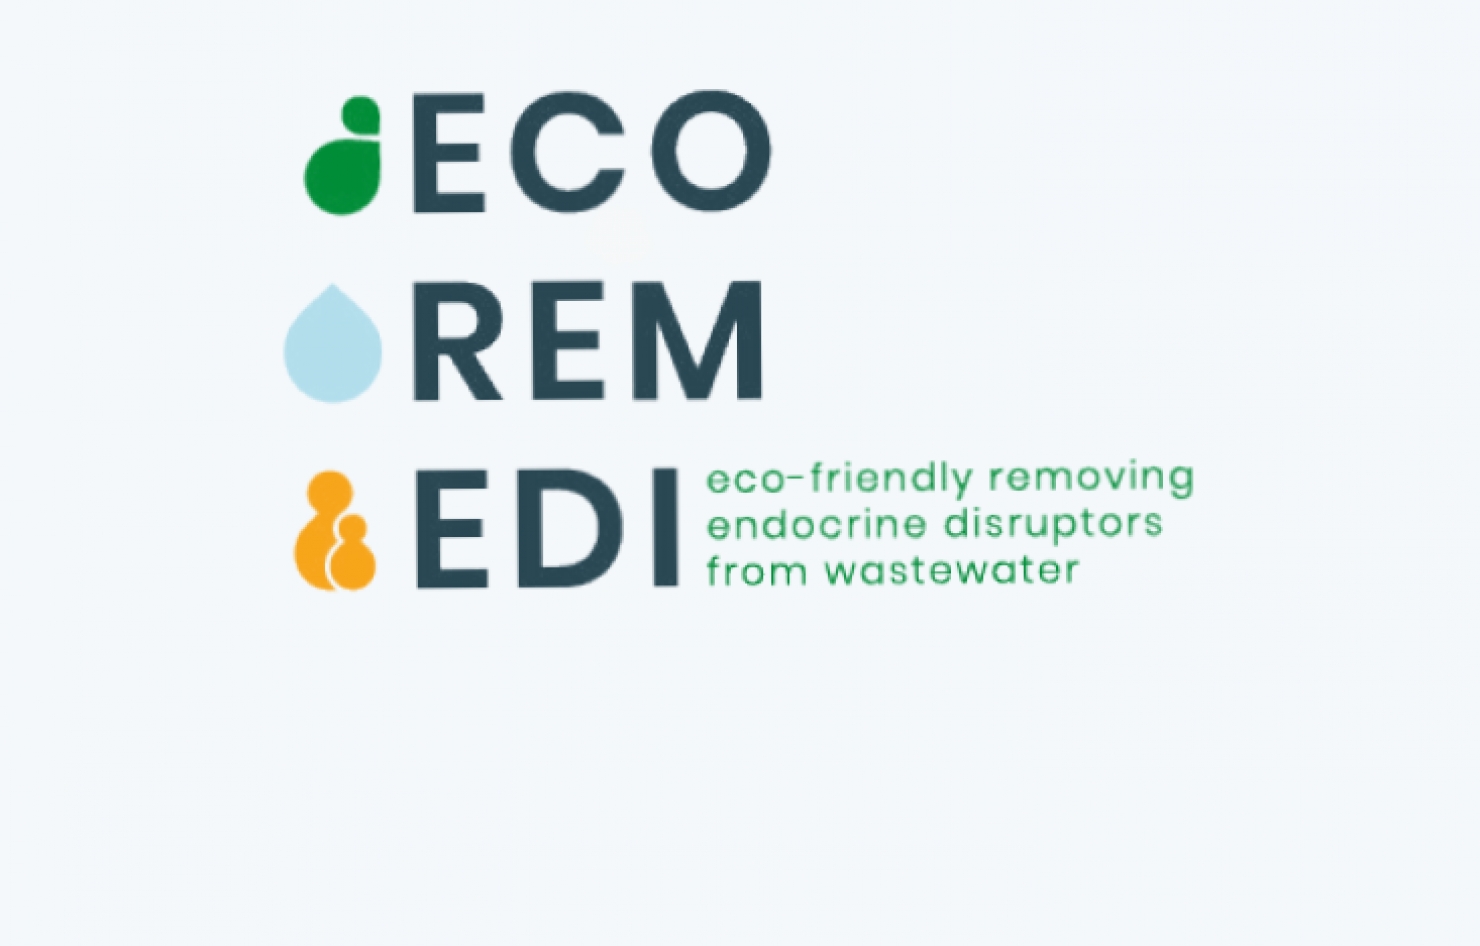 EcoRemEdi - Ecofriendly removing of endocrine disruptors from waste water